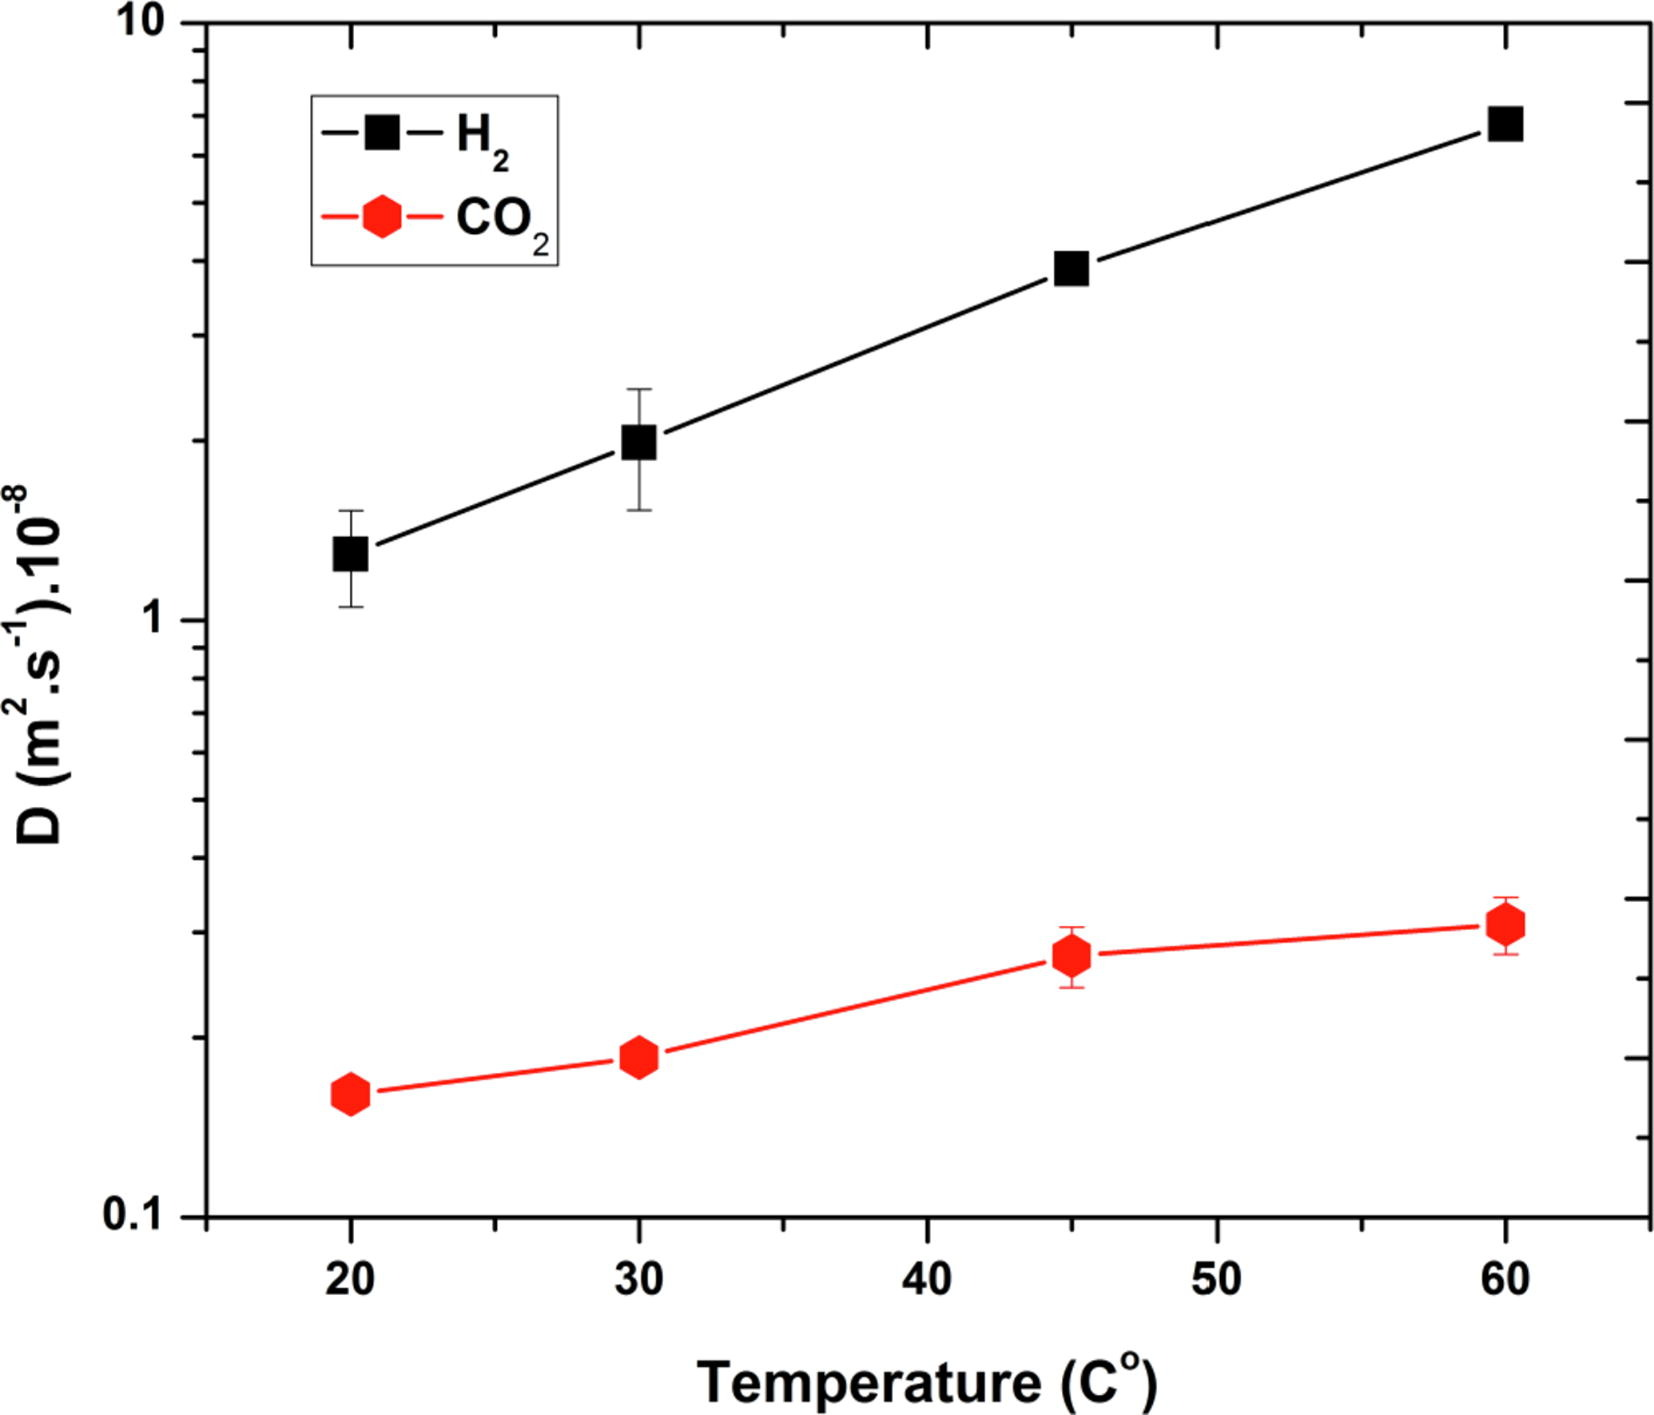 H2 and CO2 diffusion coefficients at different temperatures